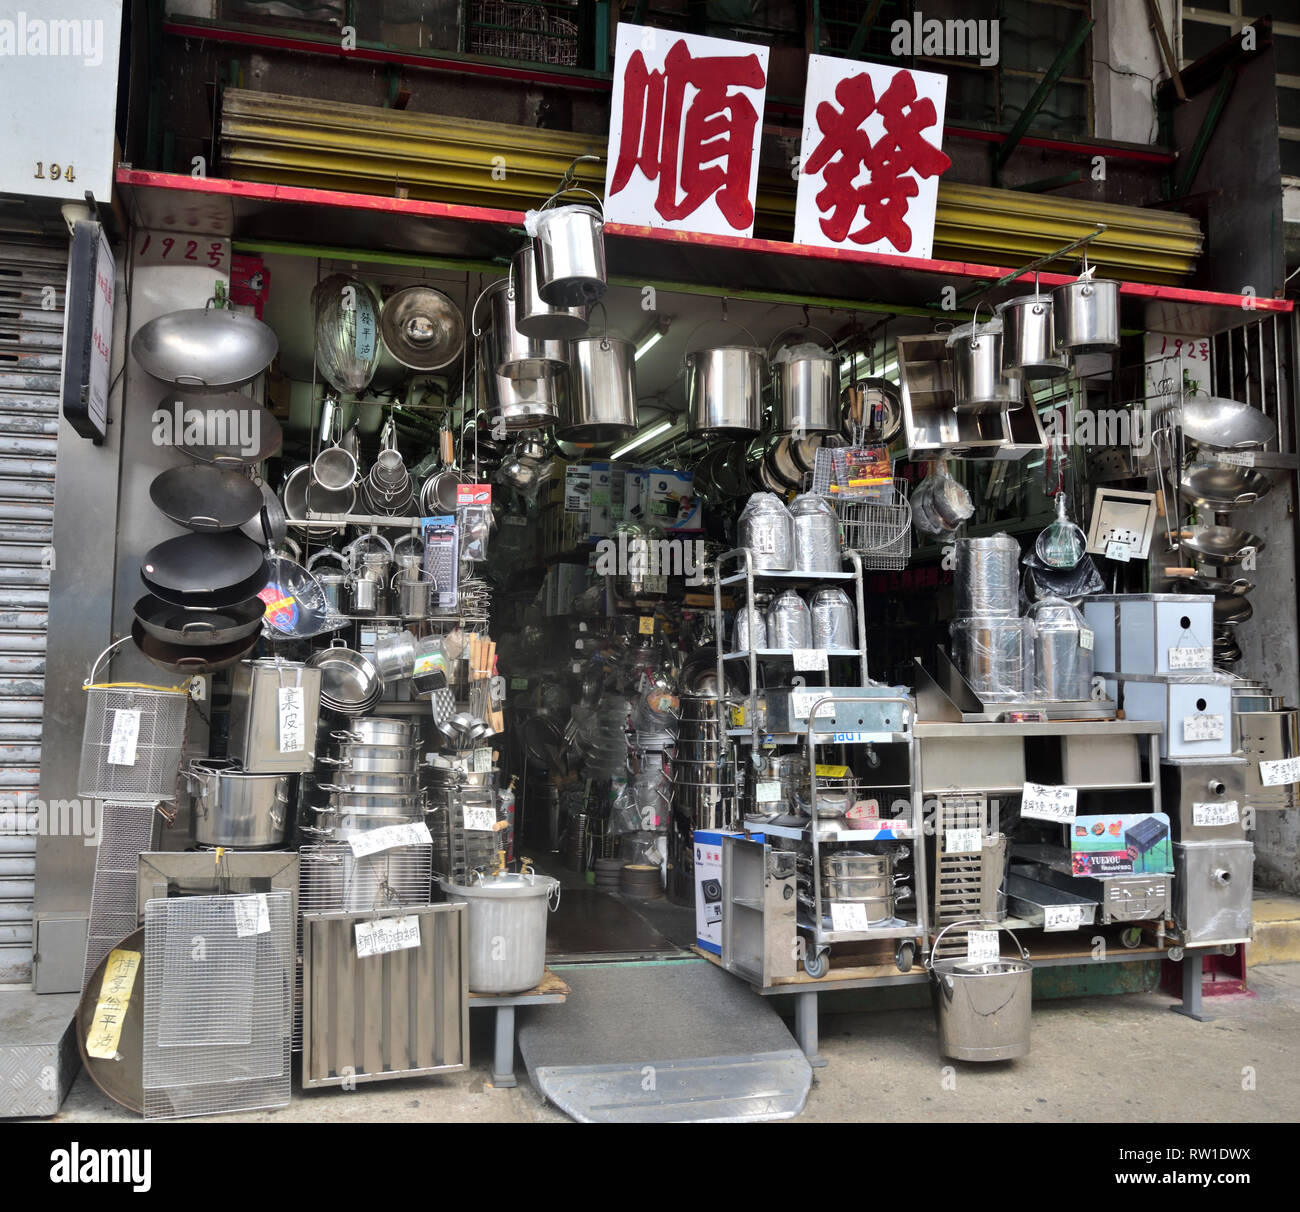 Metalware shop selling all sorts of cooking utensils and household goods in  Yau Ma Tei, Hong Kong Stock Photo - Alamy